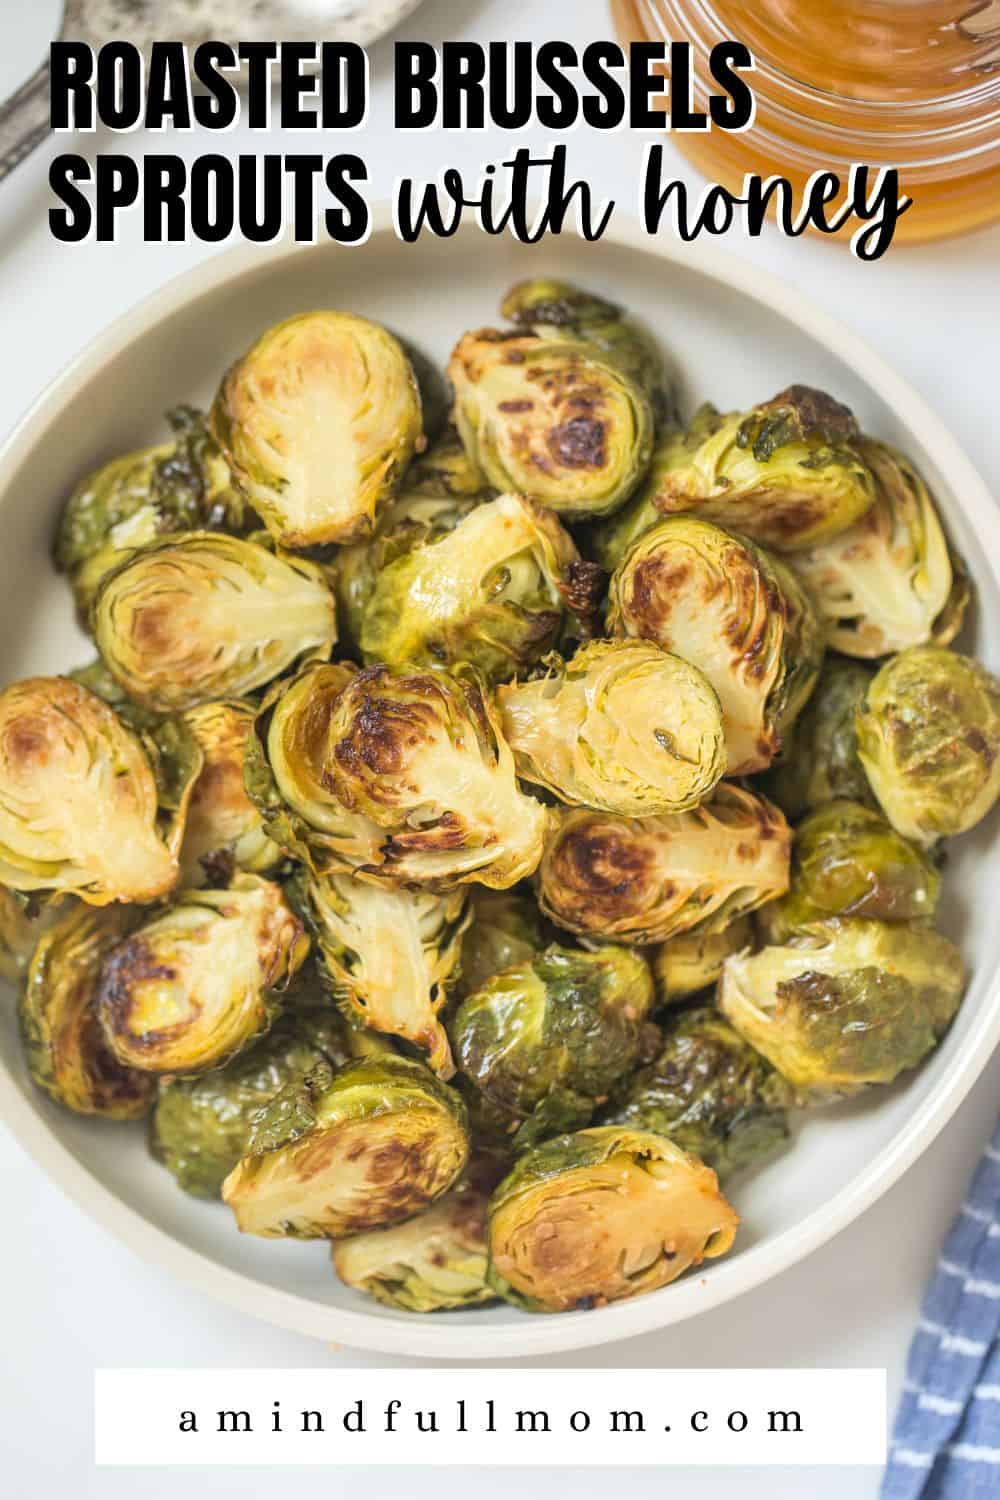 Glazed with honey, sriracha, and garlic, this recipe for Roasted Brussels Sprouts is absolutely irresistible. Roasted until caramelized with sweet honey and finished with a little kick, this is one of the best ways to enjoy Brussels sprouts.